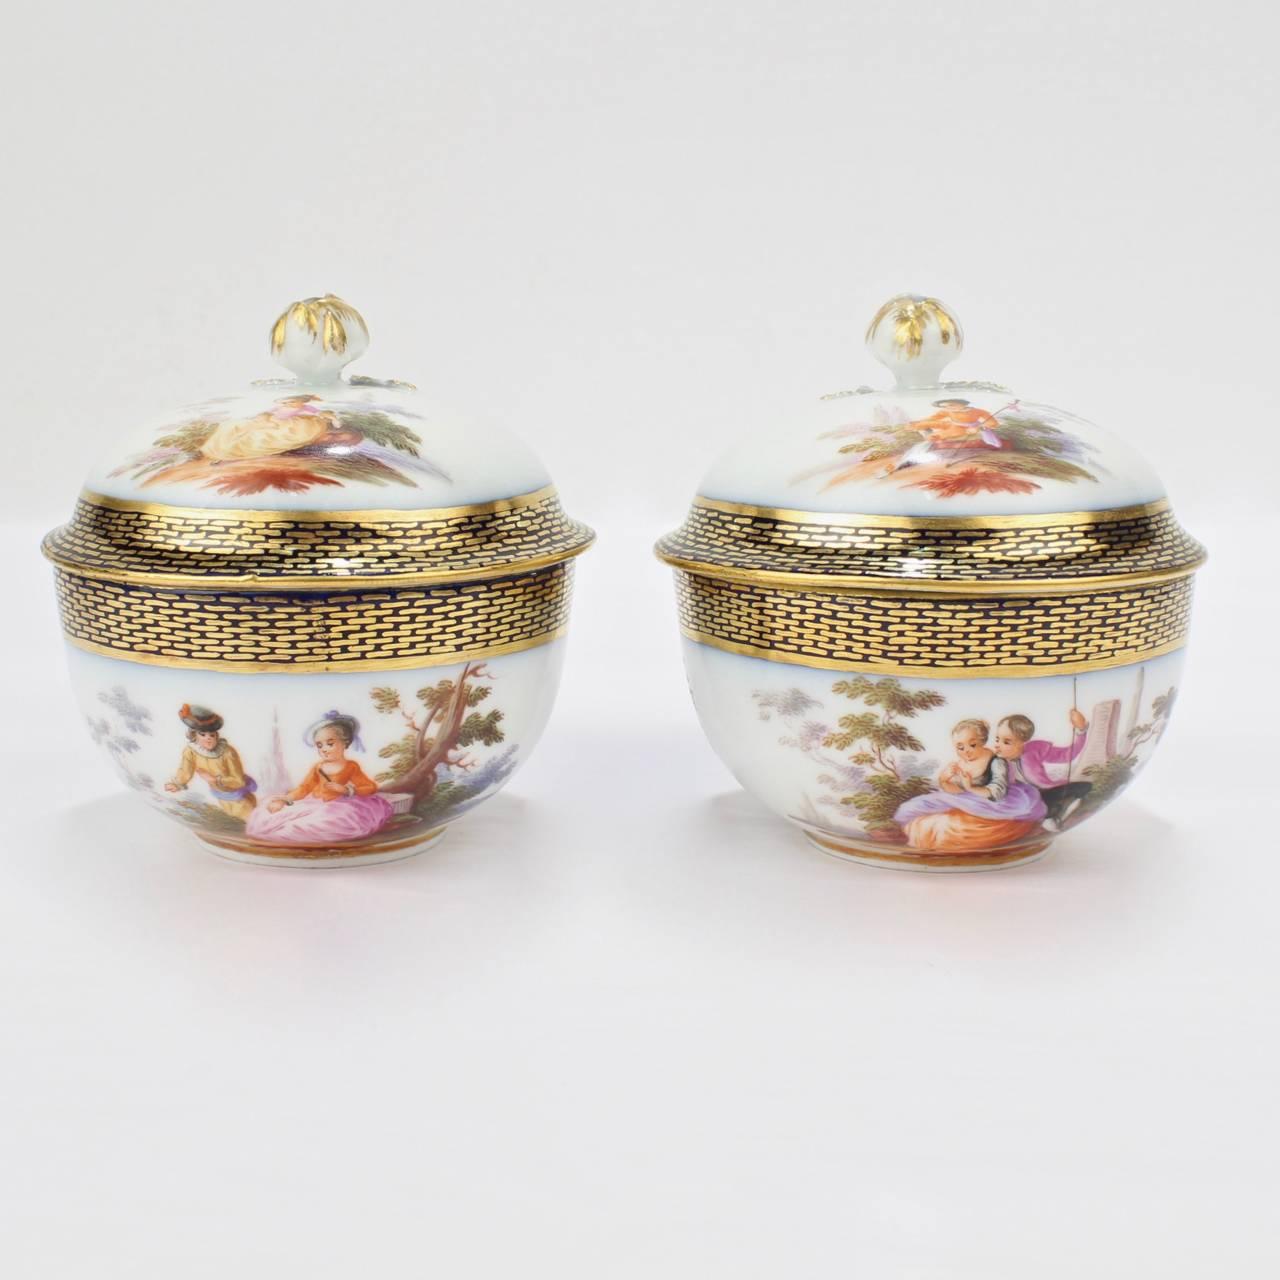 A very fine, matched pair of 19th century Meissen covered tea cups and saucers (or demitasse coffee cups and saucers.)

With wonderful hand-painted scenes of lovers to the lids, cups, and saucers. The rims decorated in underglaze cobalt blue and